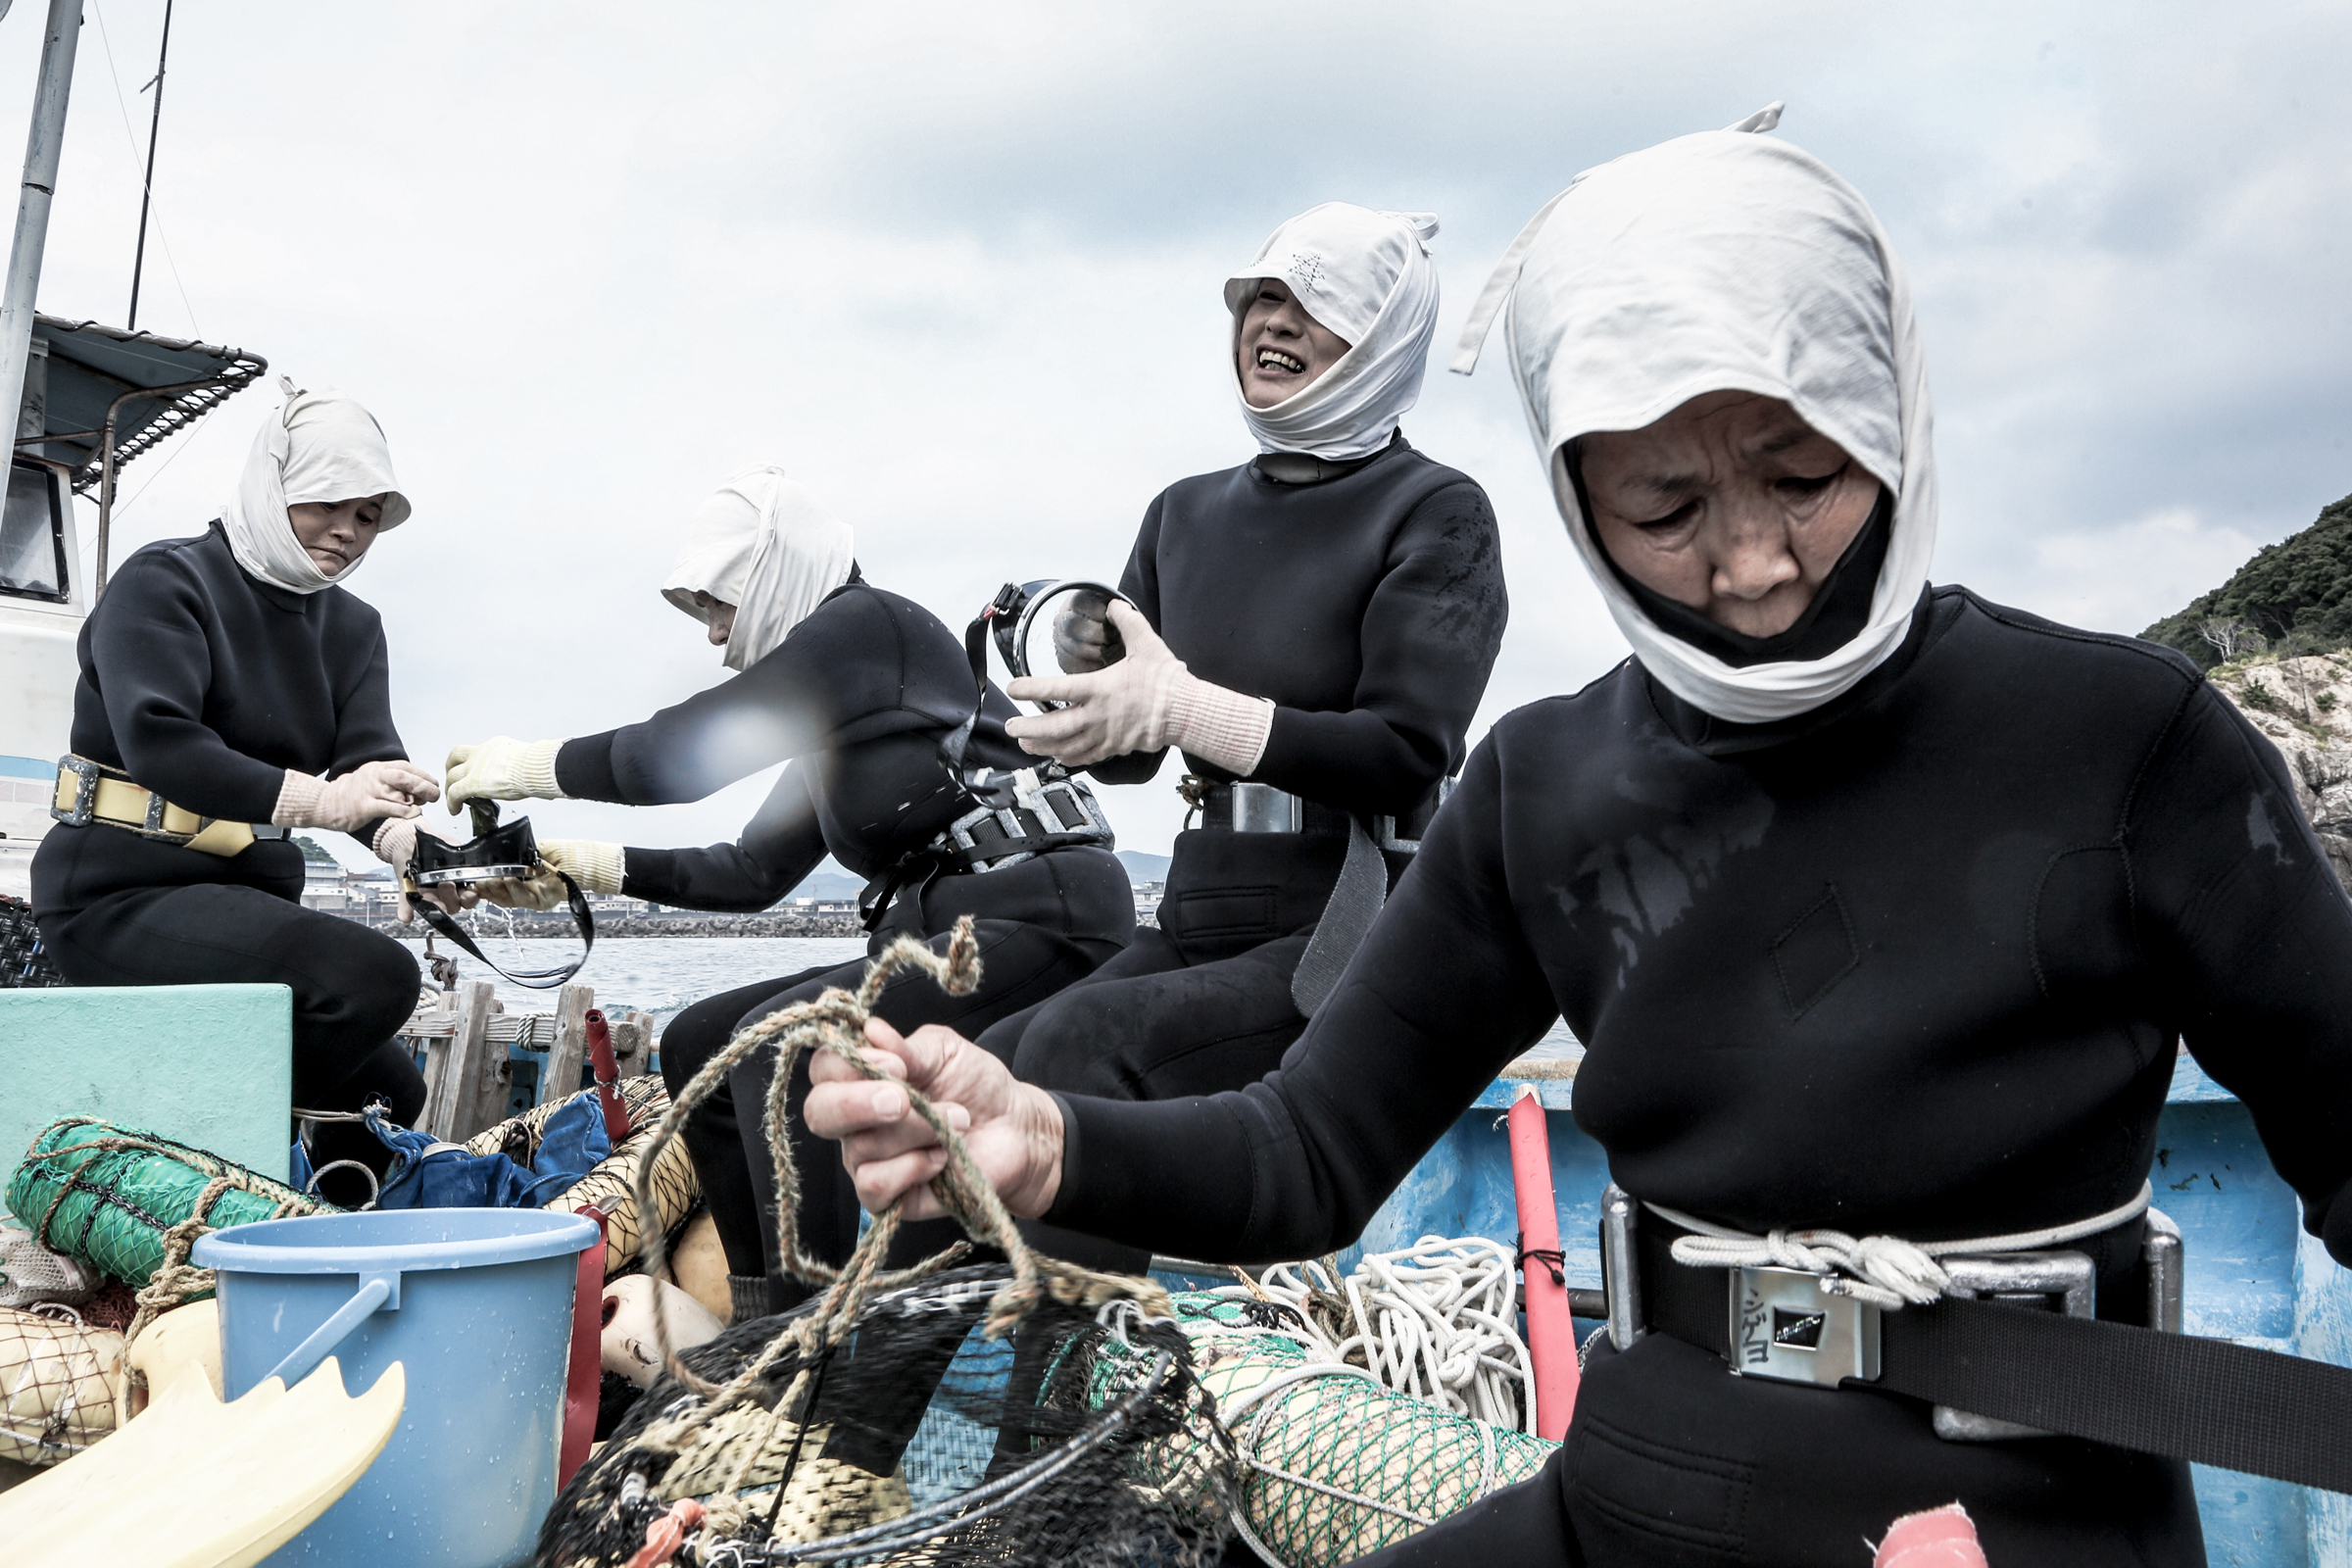 Meet the Ama Divers of Toba, Japan: Preserving Tradition and a Bond with the Sea